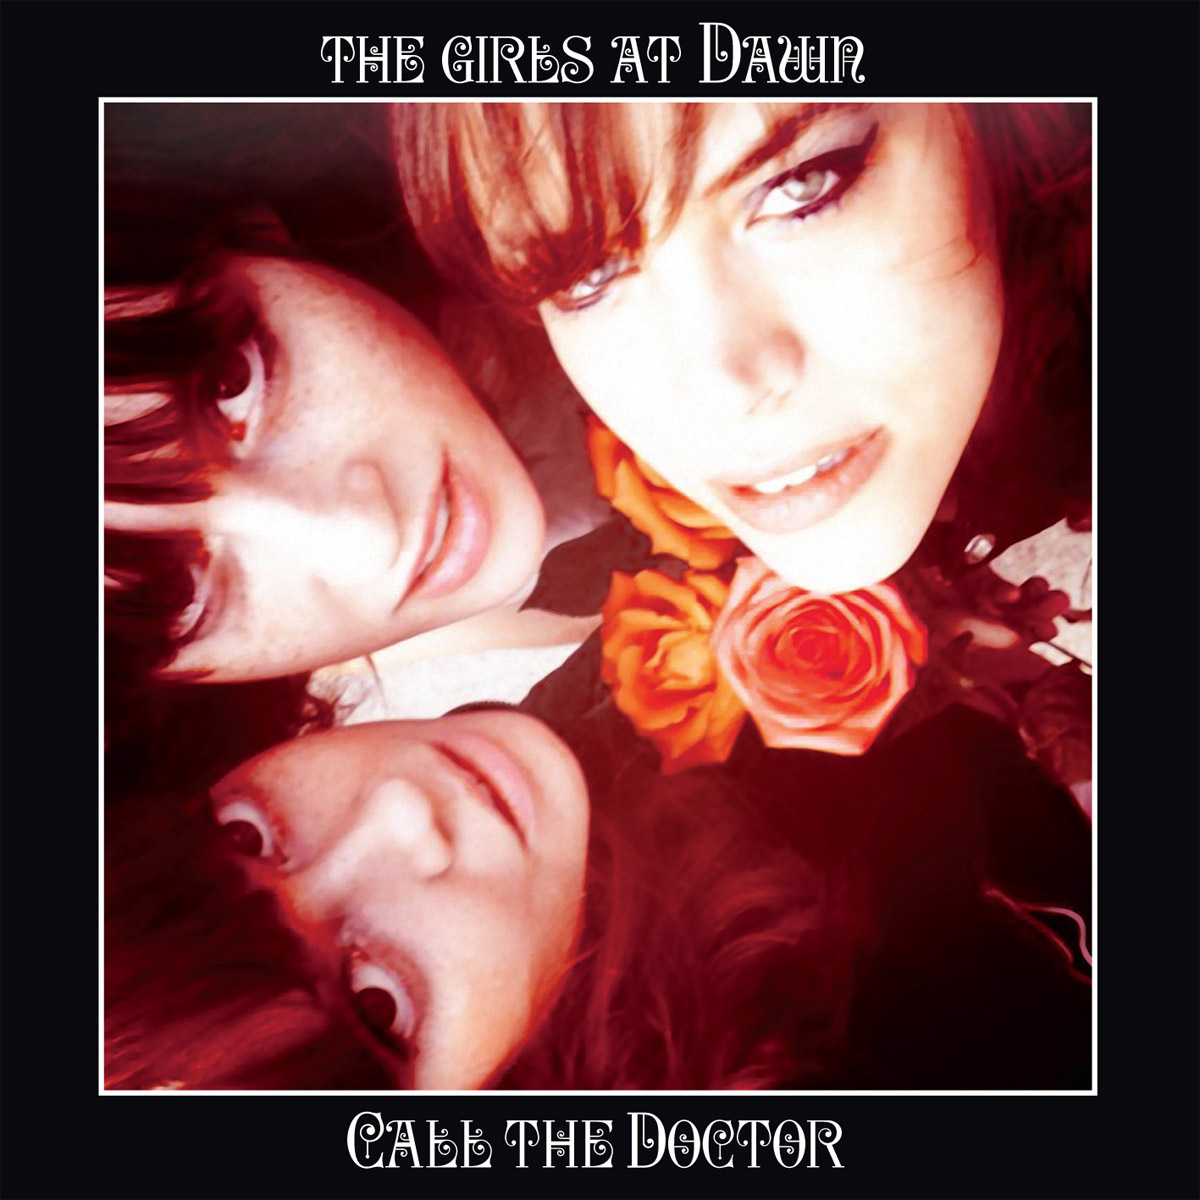 The Girls at Dawn - Call the Doctor LP/CD cover